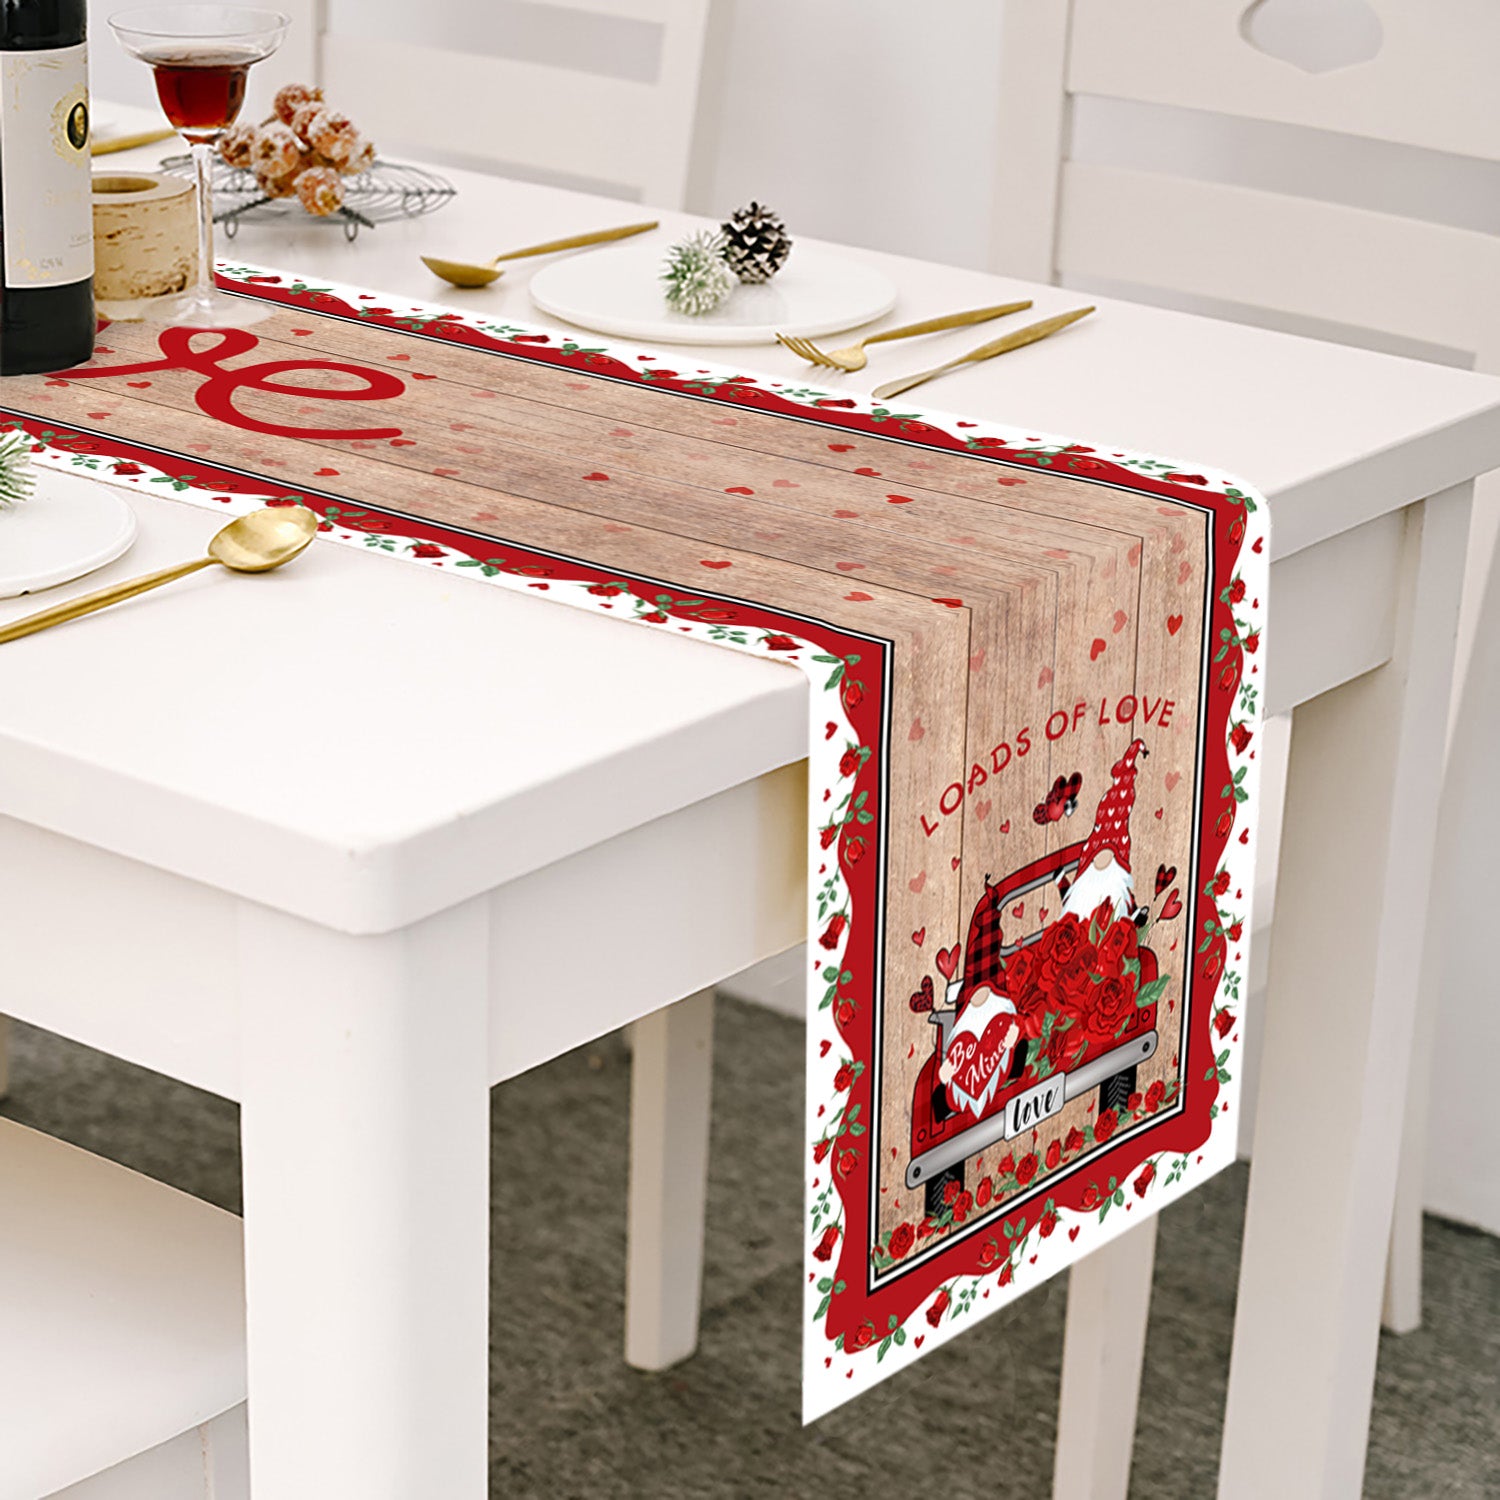 Loads Of Love - Driving Gnome Themed Table Runner For Valentine's Day